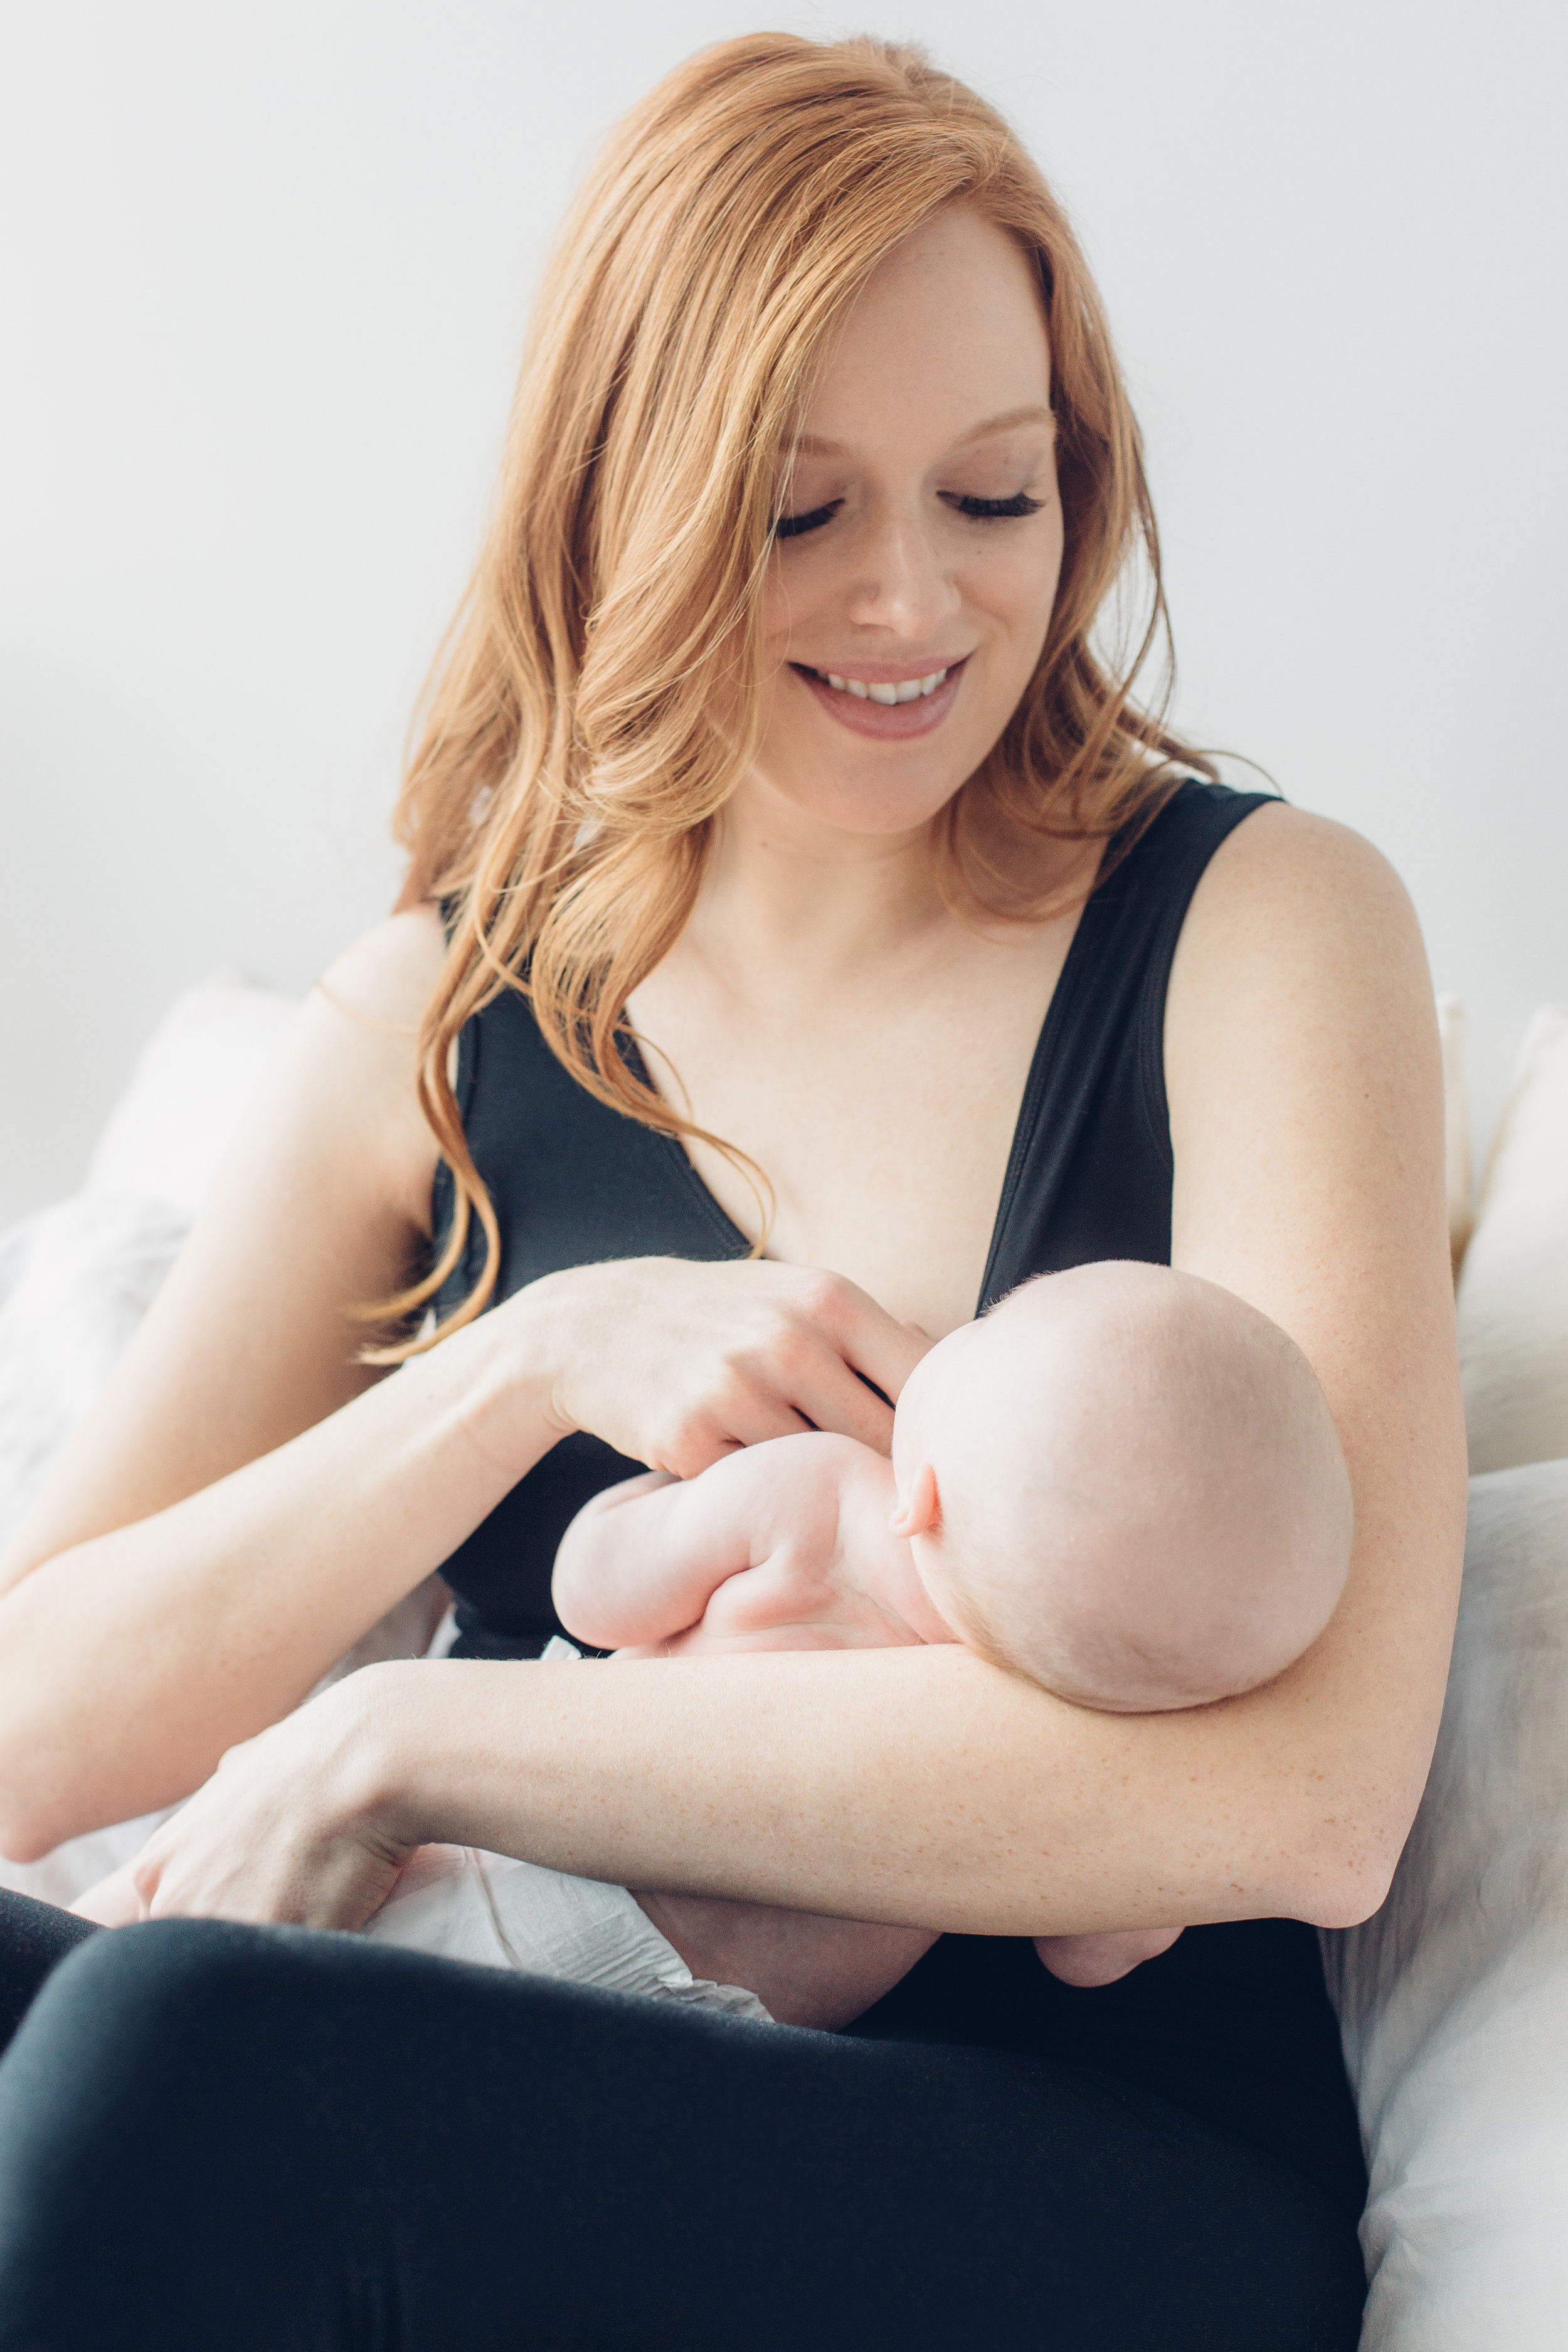 “The Larken X Bra has easy nursing access and hands-free pumping